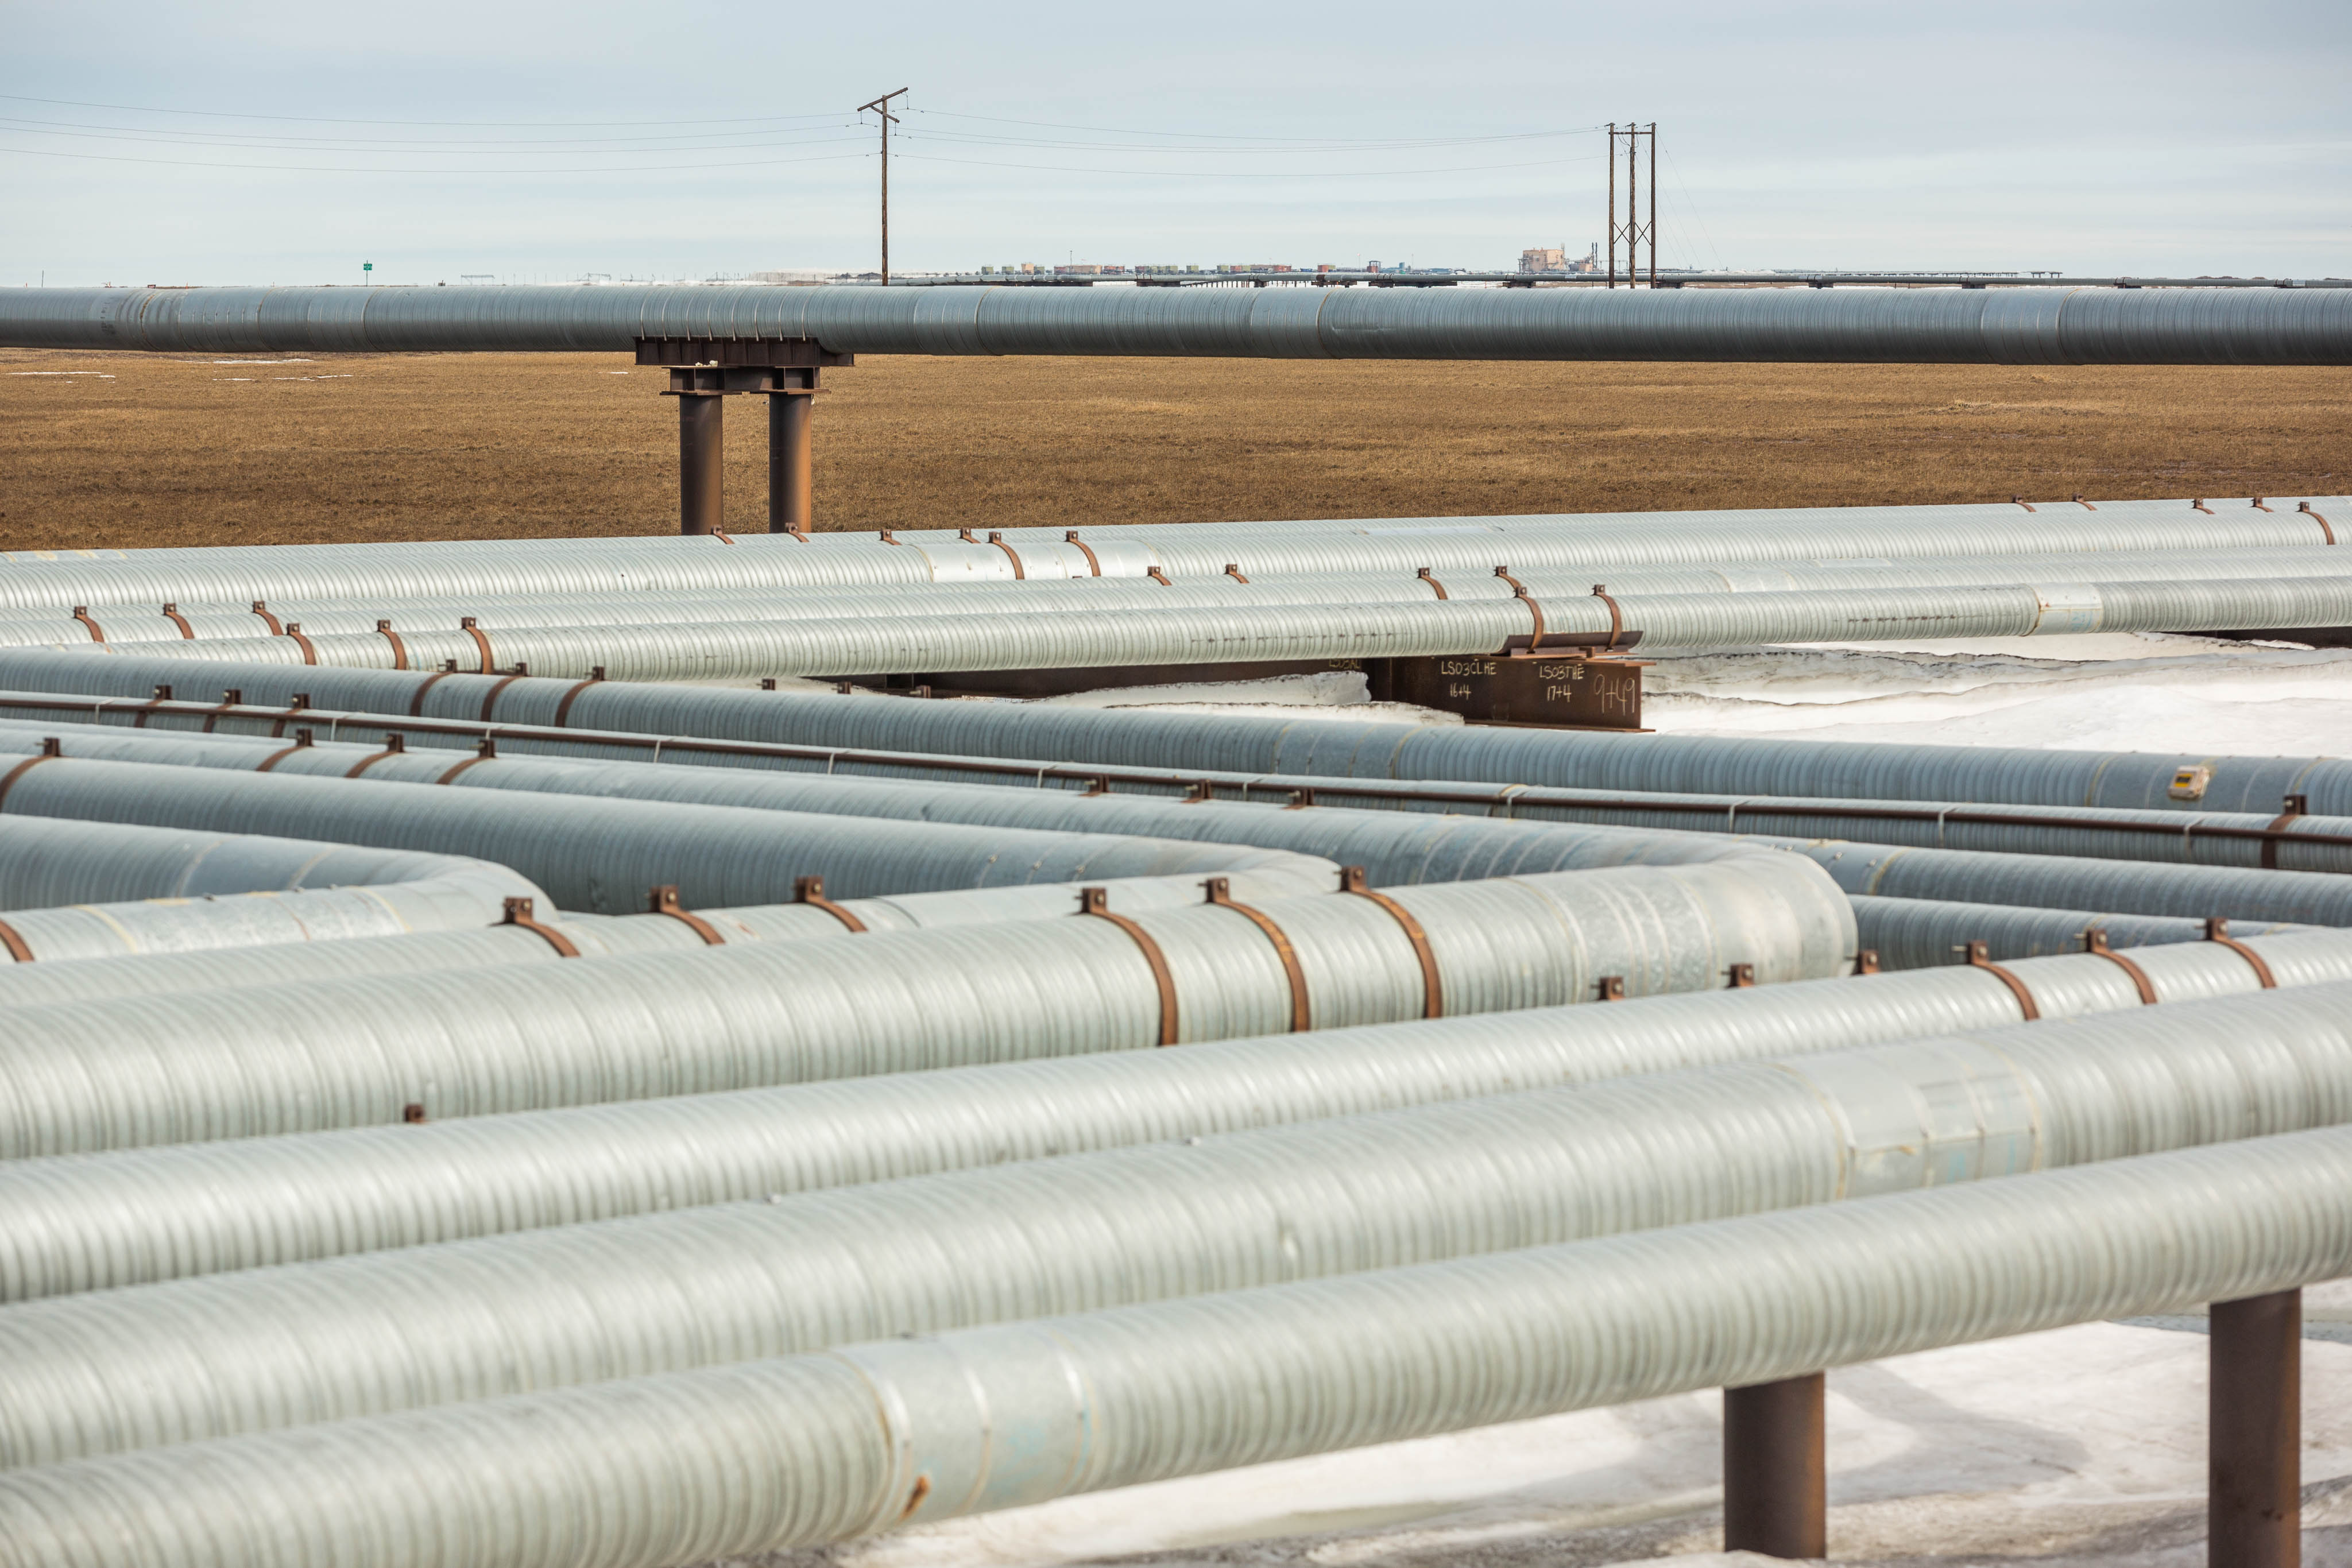 Pipelines at Prudhoe Bay on Alaska's North Slope on Friday, May 22, 2015. (Loren Holmes / Alaska Dispatch News)